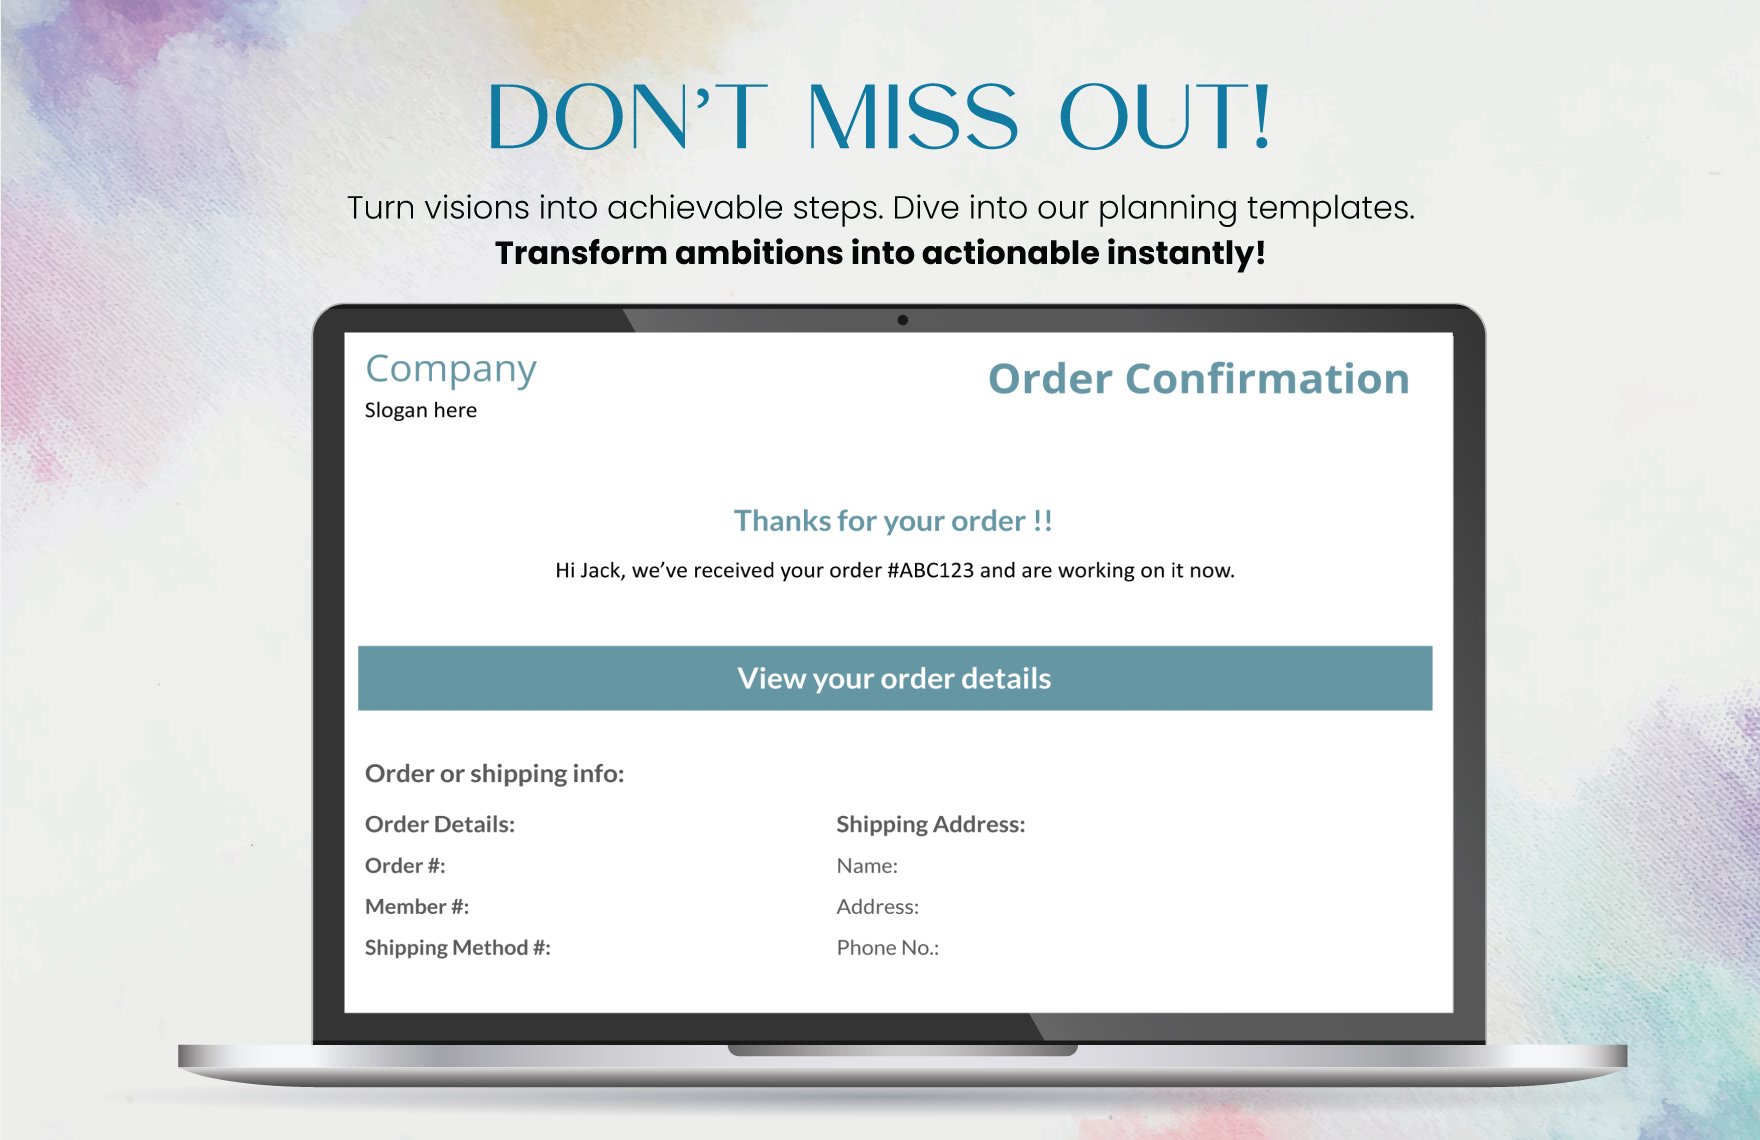 Sample Order Confirmation Template